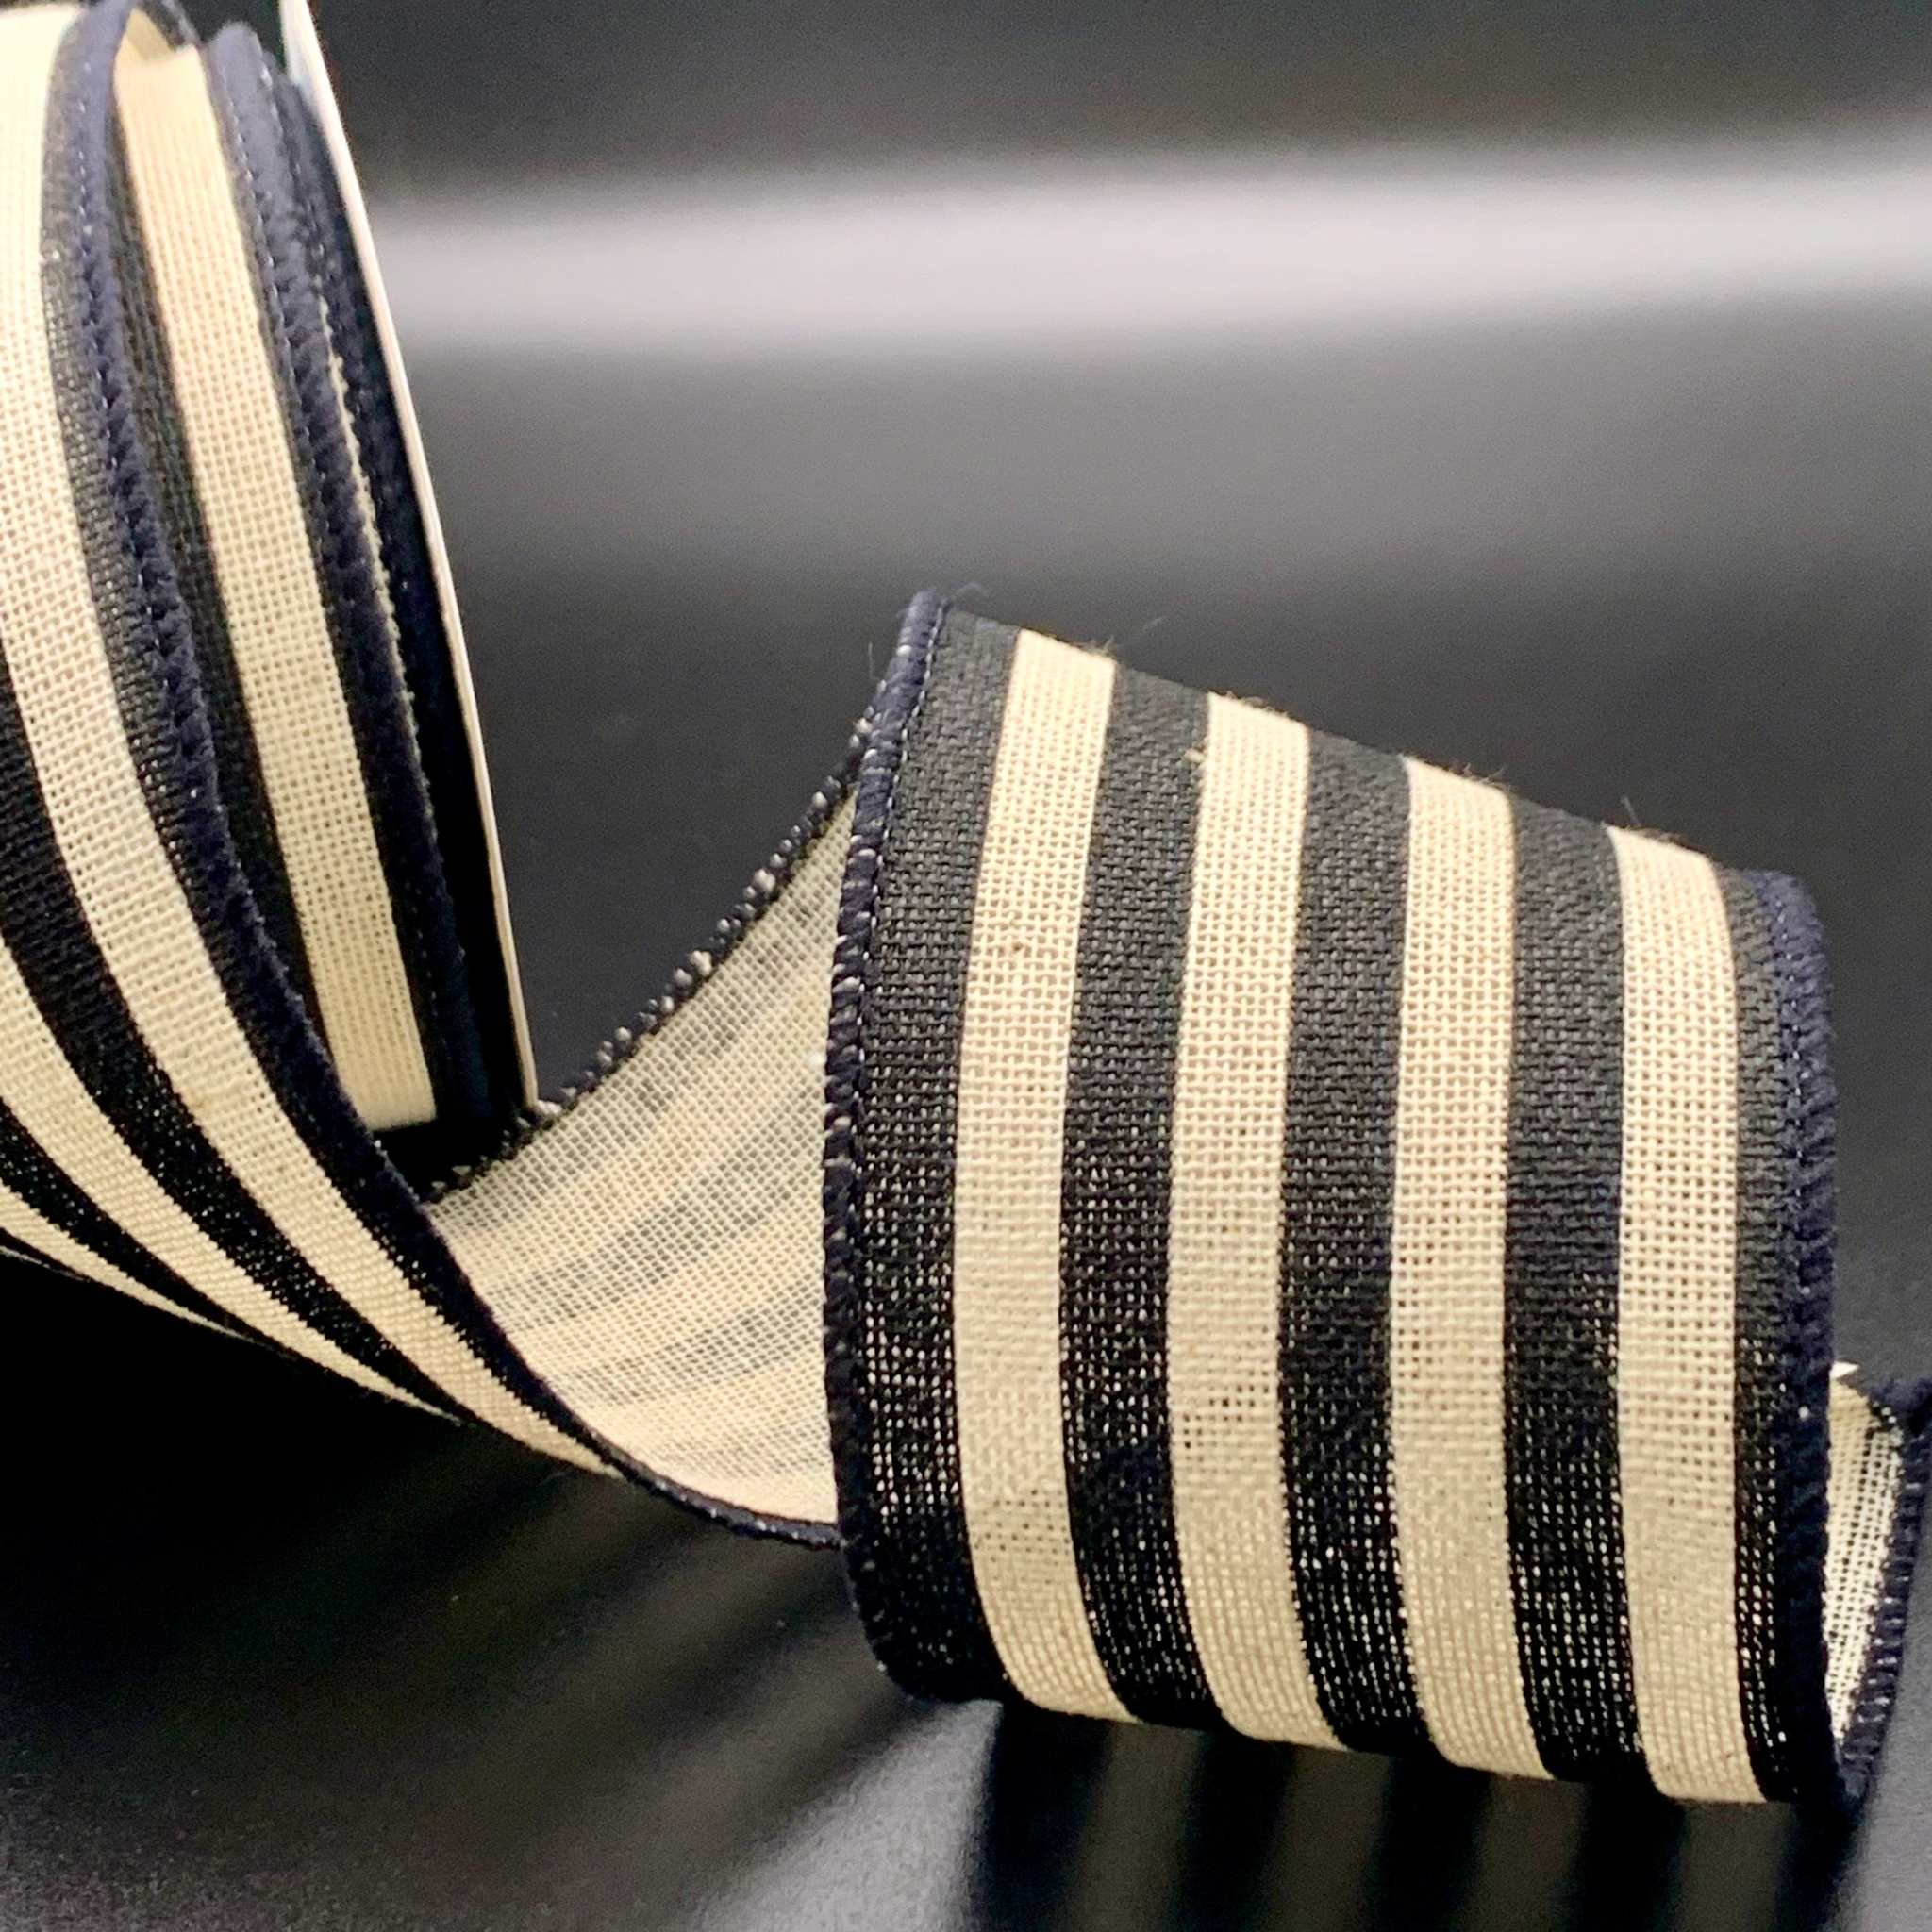 Ribbonly Wired Black and White / 10m / 63mm Liquorice Stripe Wired Canvas Ribbon